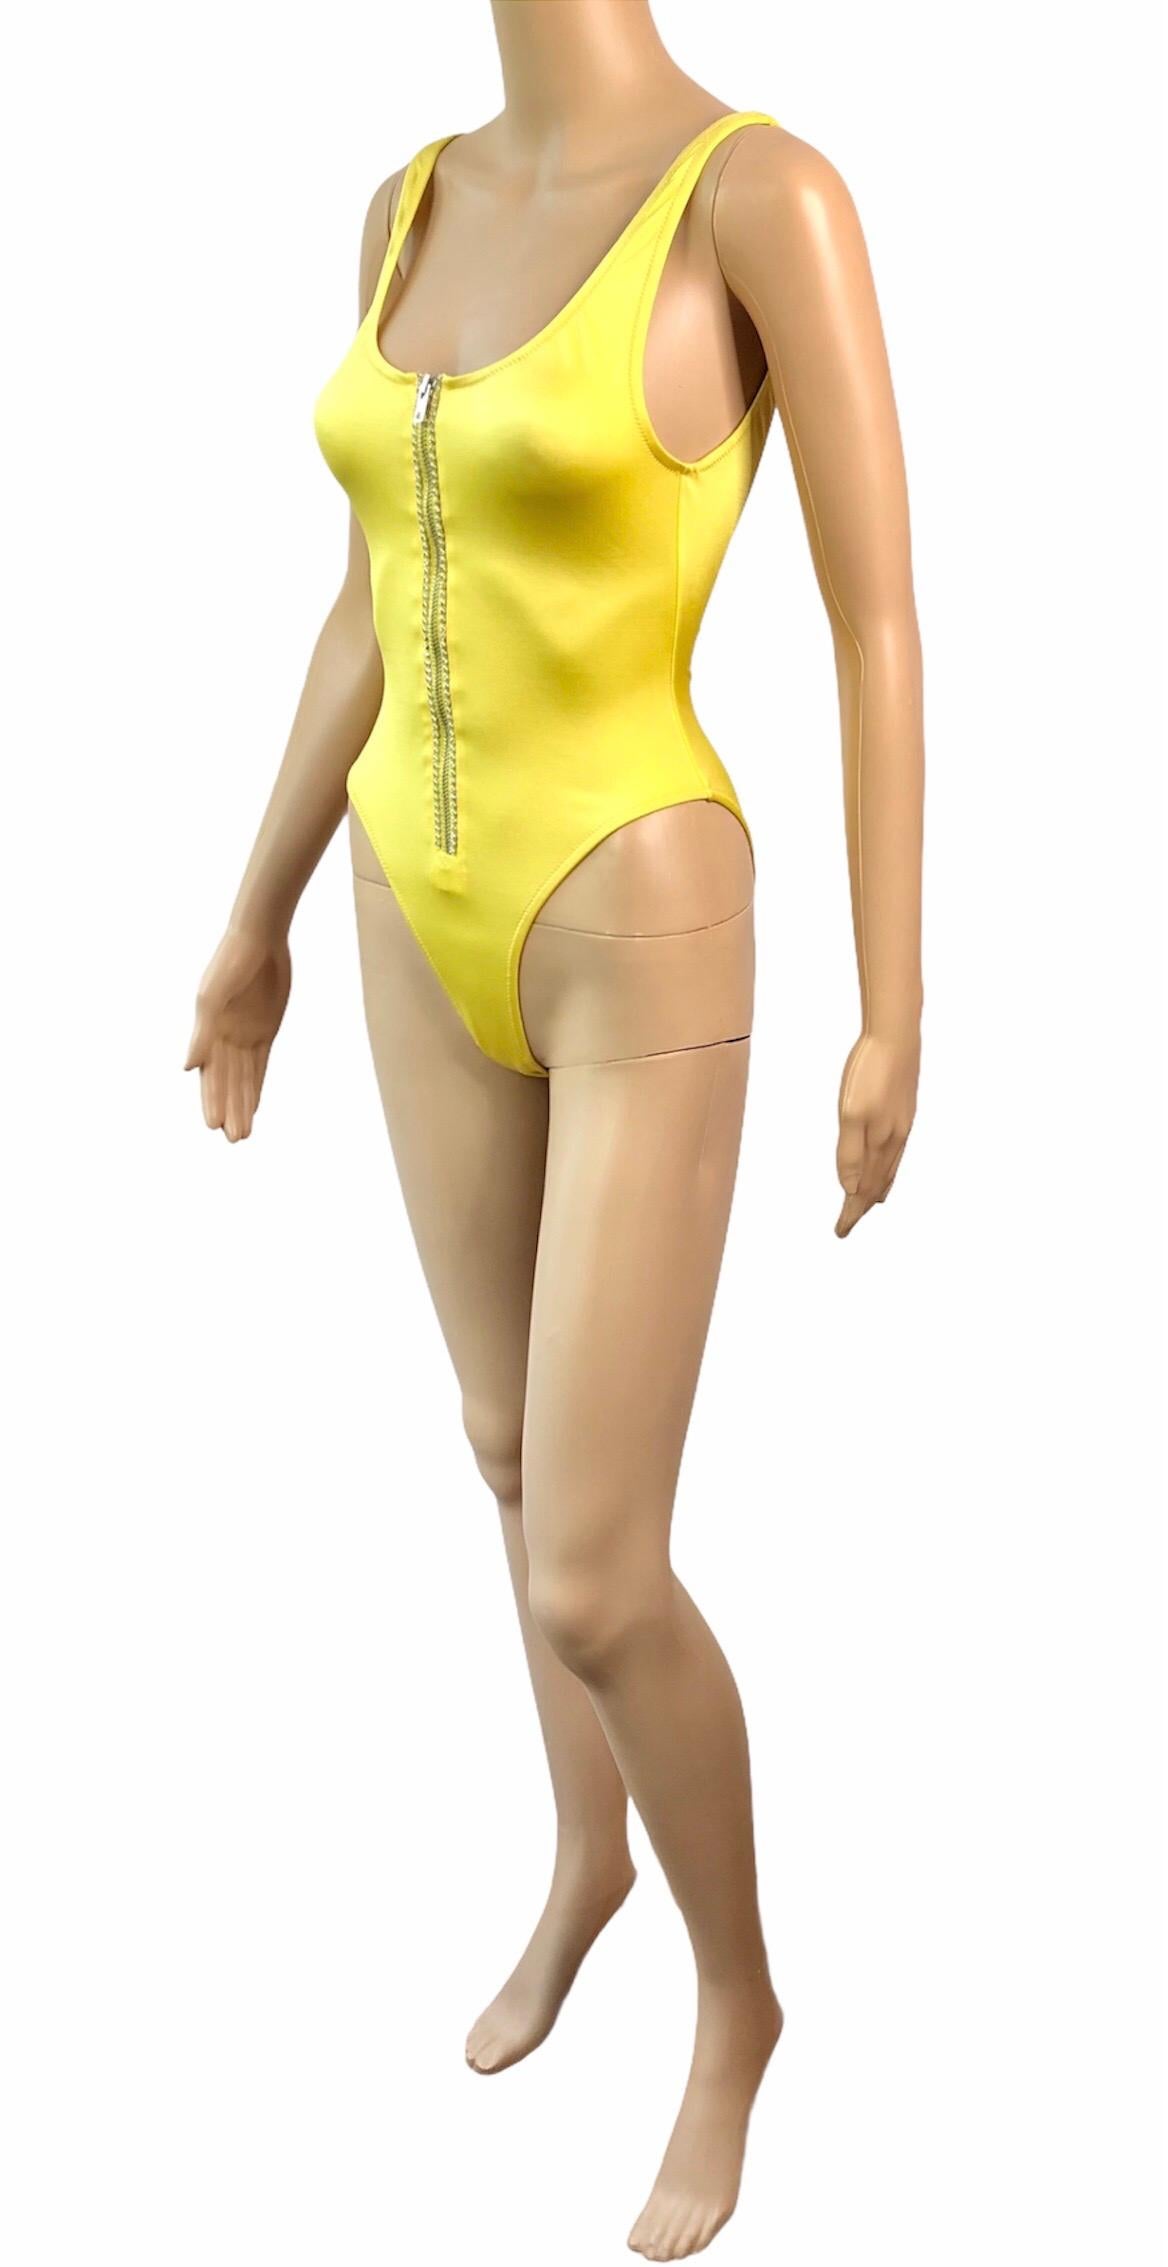 Gianni Versace S/S 1996 Vintage Crystal Zipper Yellow Bodysuit Swimwear Swimsuit In Excellent Condition For Sale In Naples, FL